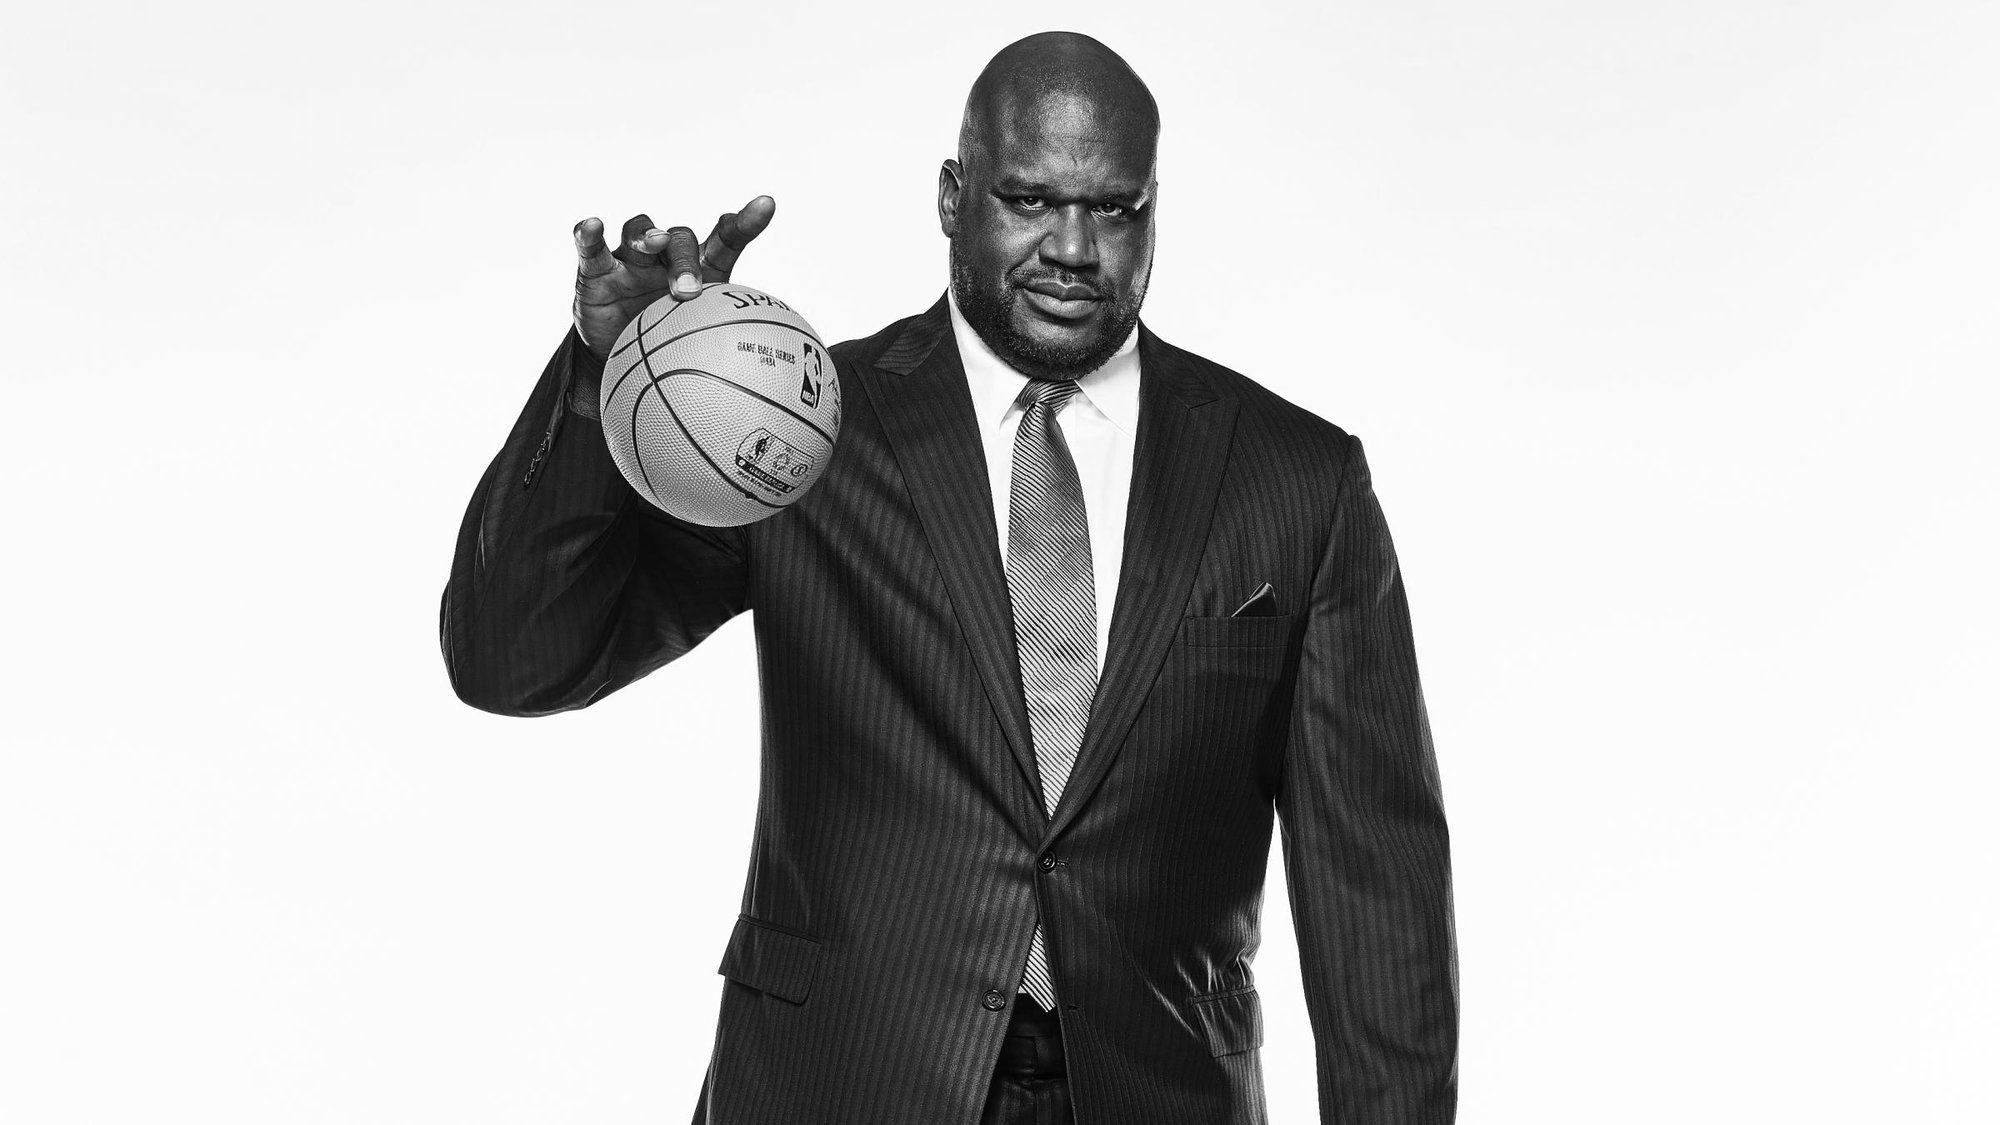 Shaquille O'Neal plays with small basketball